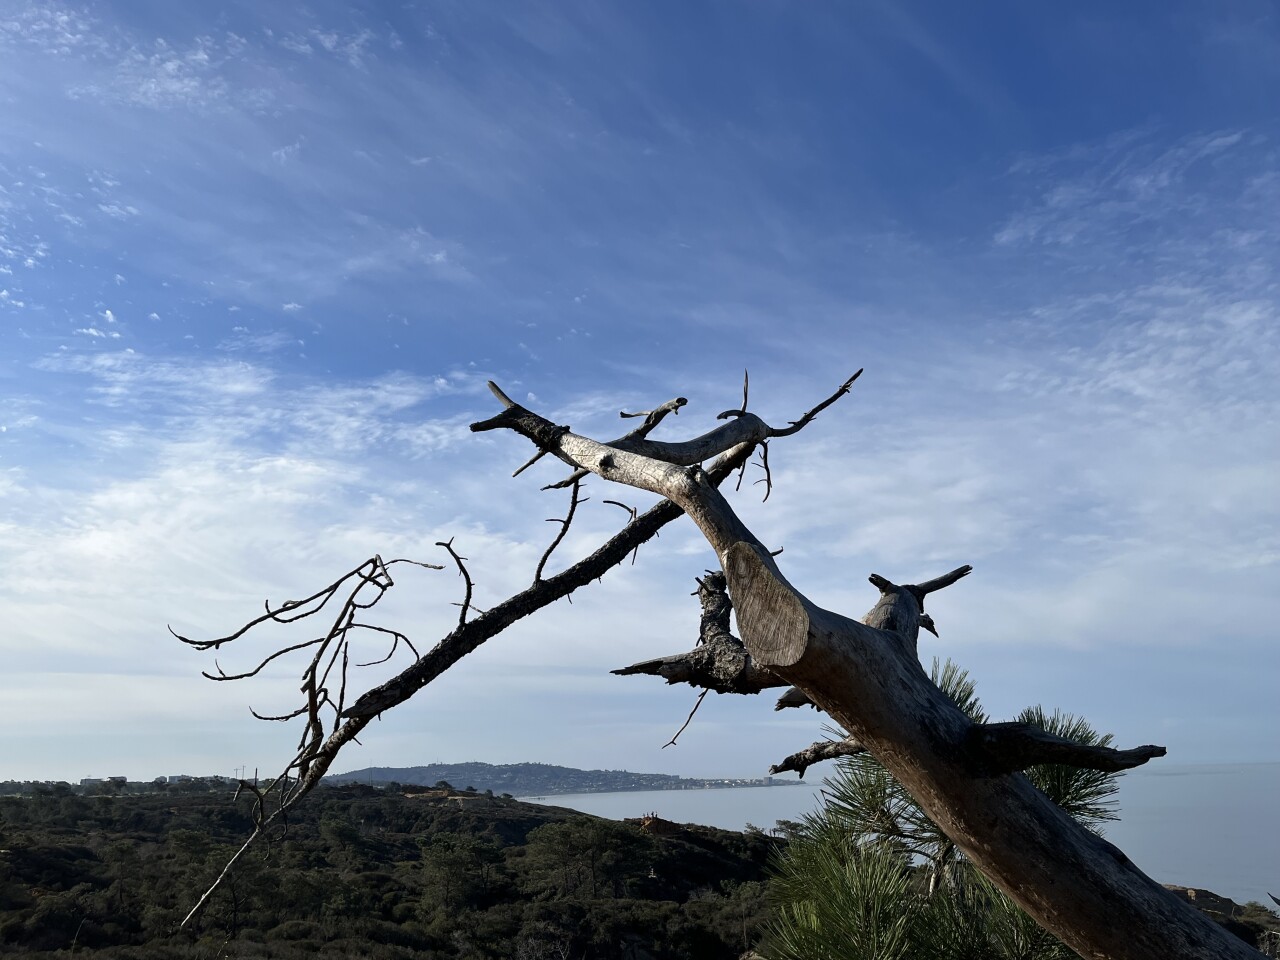 This photo taken on the Guy Fleming Trail at Torrey Pines State Reserve resembles a giraffe greeting hikers. 